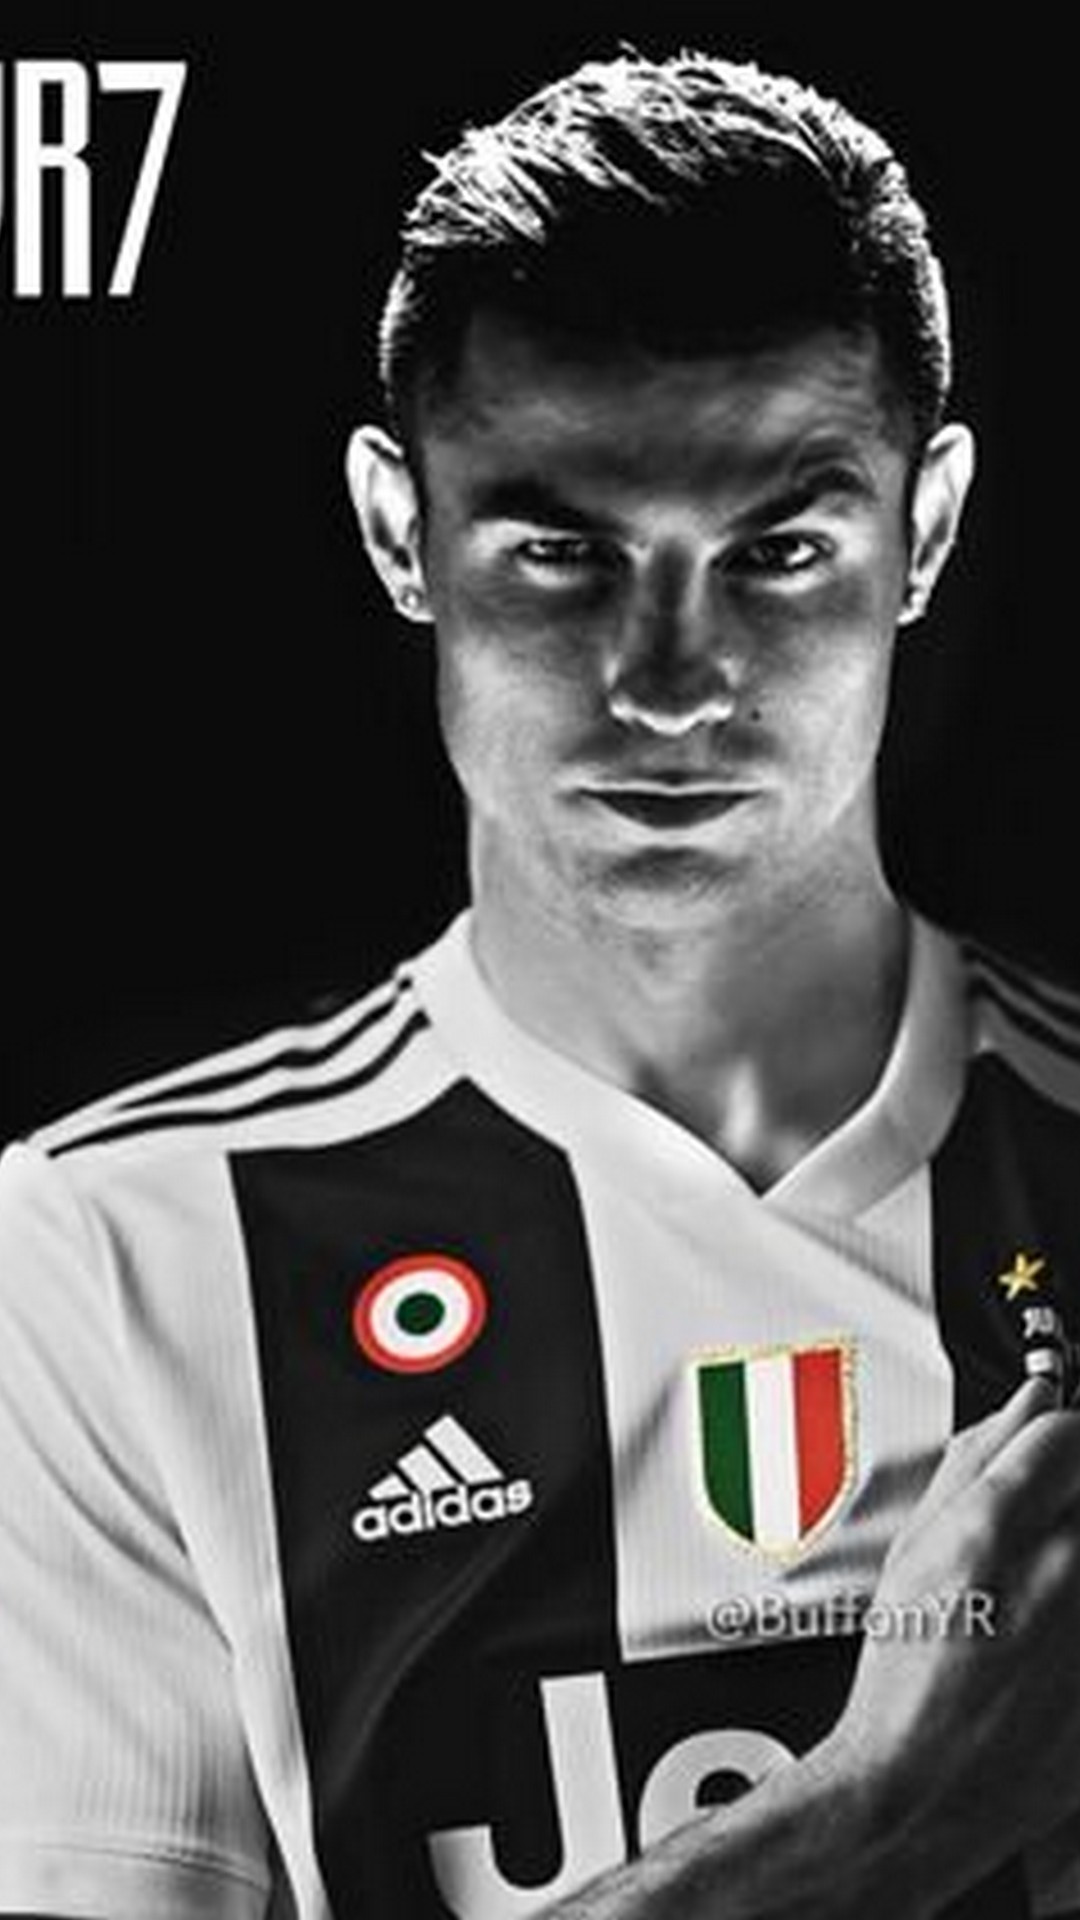 Cristiano Ronaldo Juventus Wallpaper Android with image resolution 1080x1920 pixel. You can make this wallpaper for your Android backgrounds, Tablet, Smartphones Screensavers and Mobile Phone Lock Screen